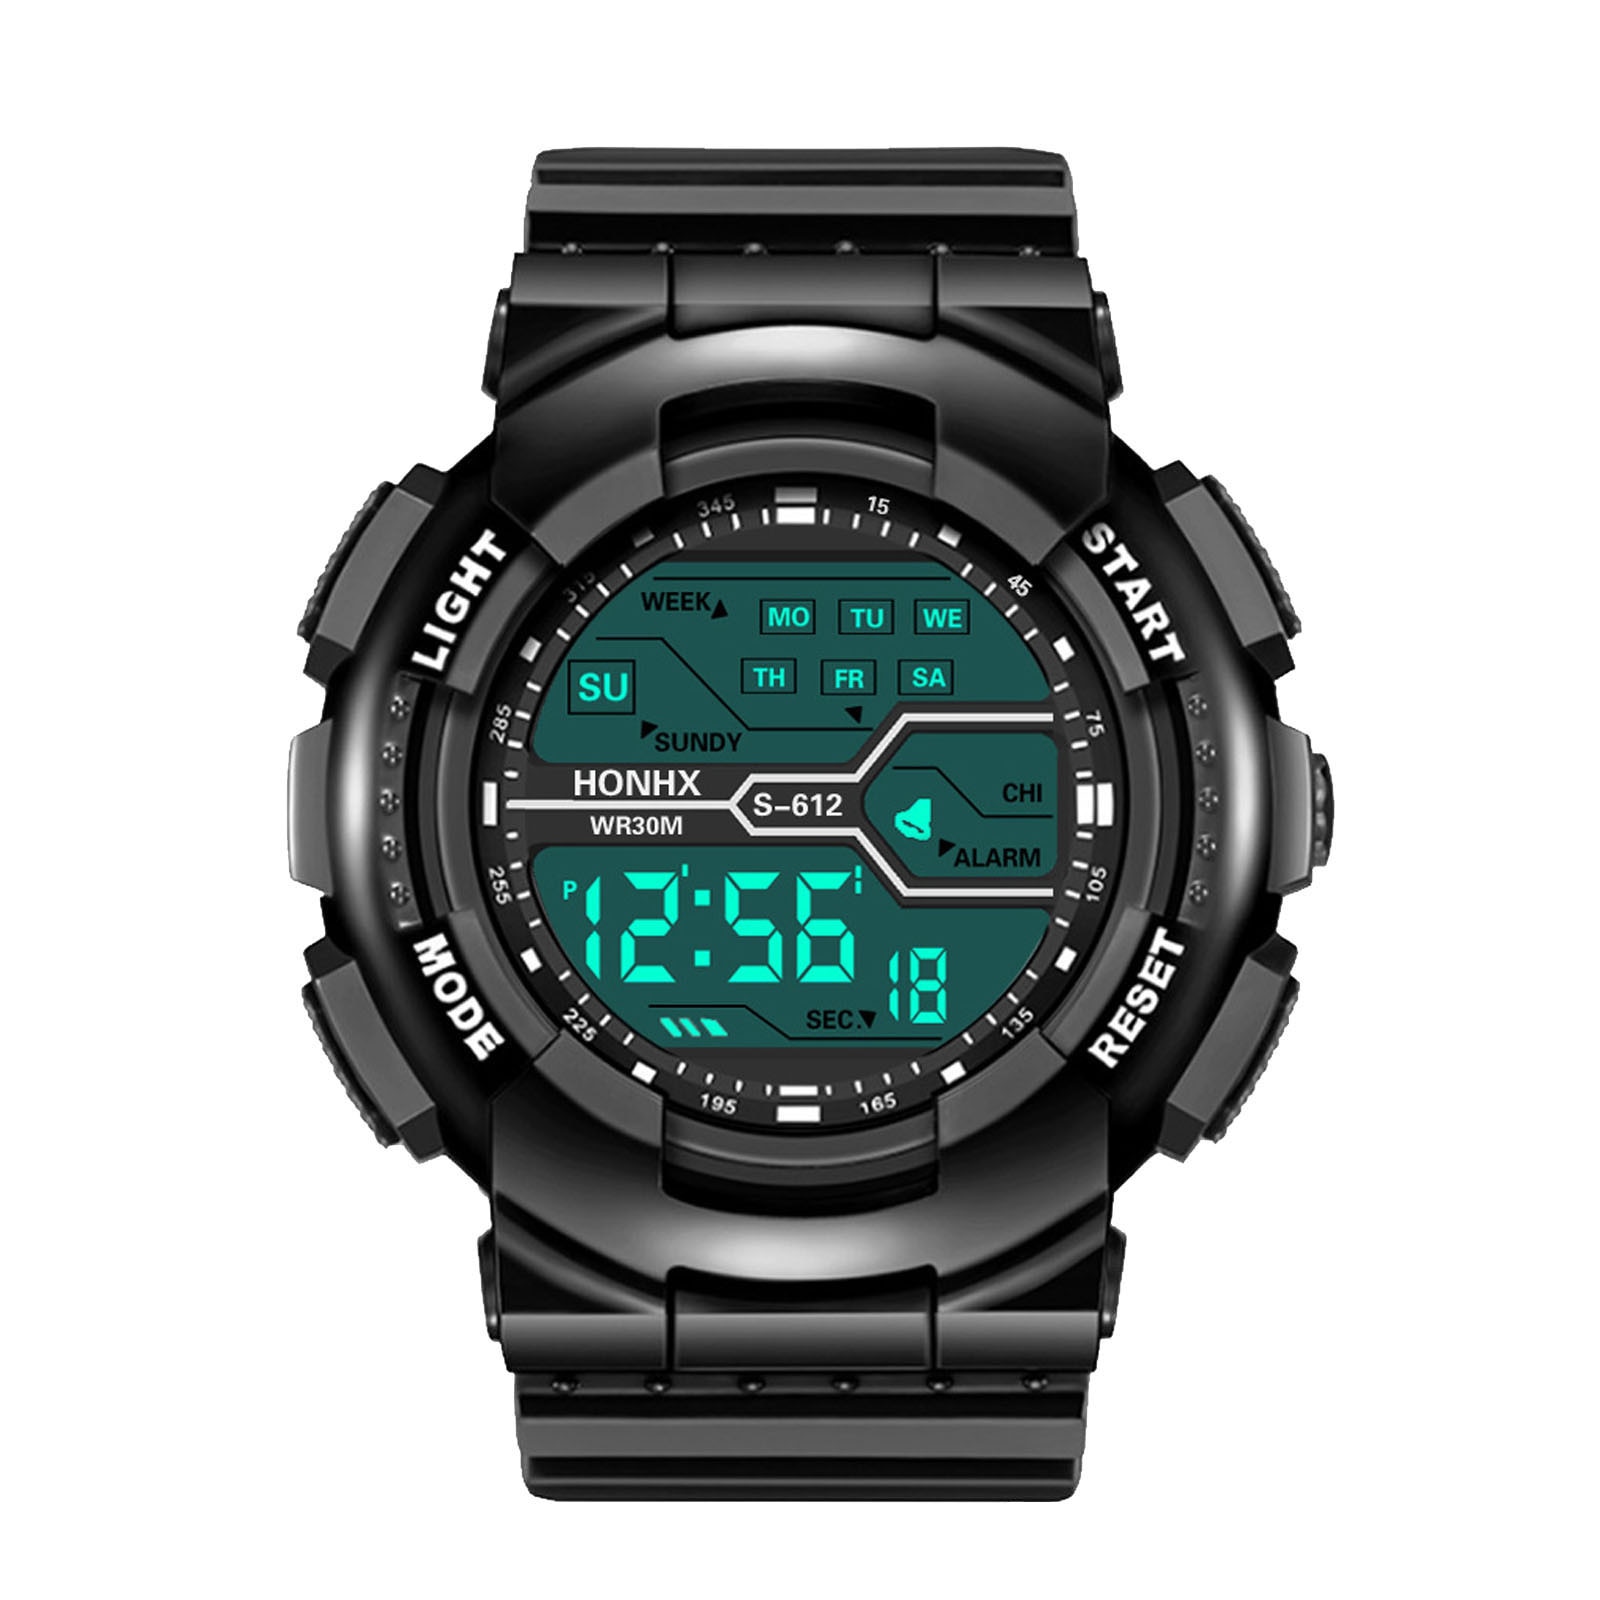 Digital Watch A Variety Of Styles Of Cool Sports Electronic Watches With Four Buttons Life Waterproof Watch